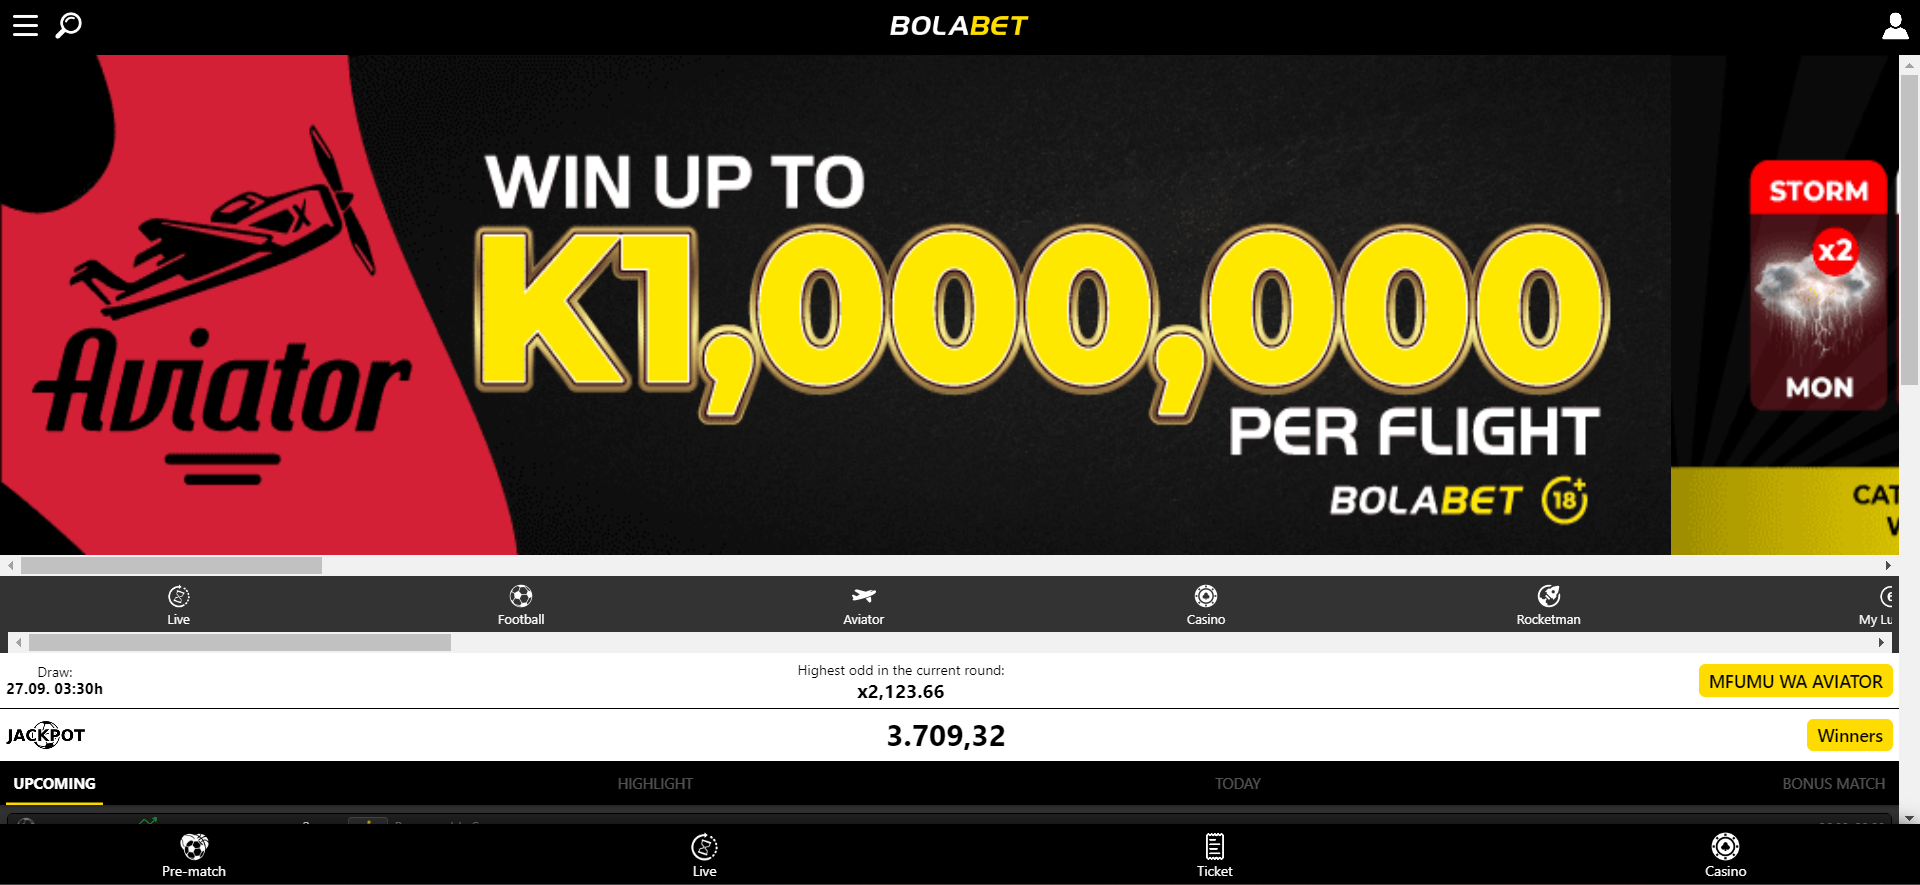 Image for Bolabet sportsbook homepage